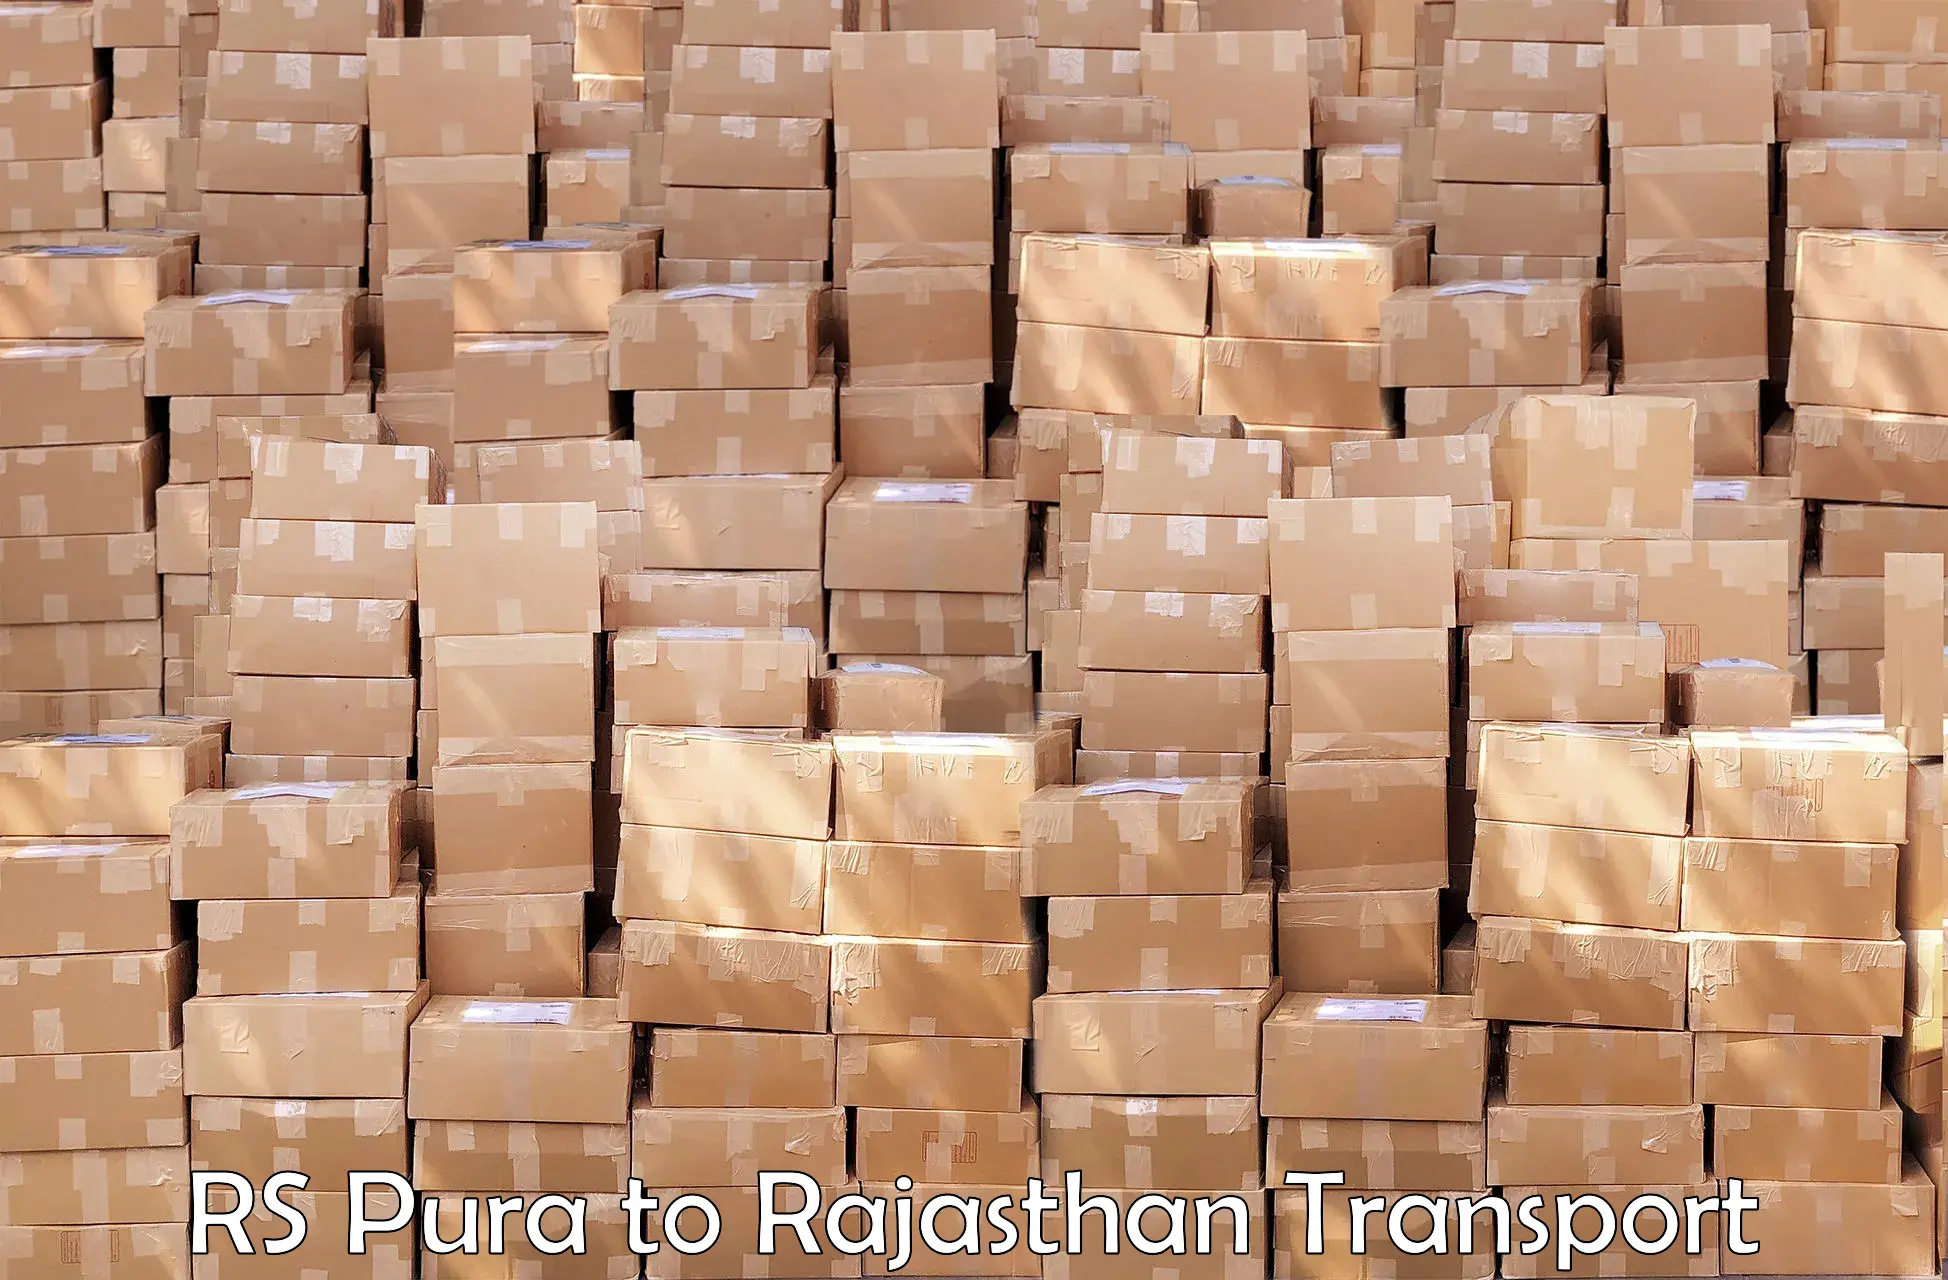 Interstate transport services RS Pura to Yeswanthapur